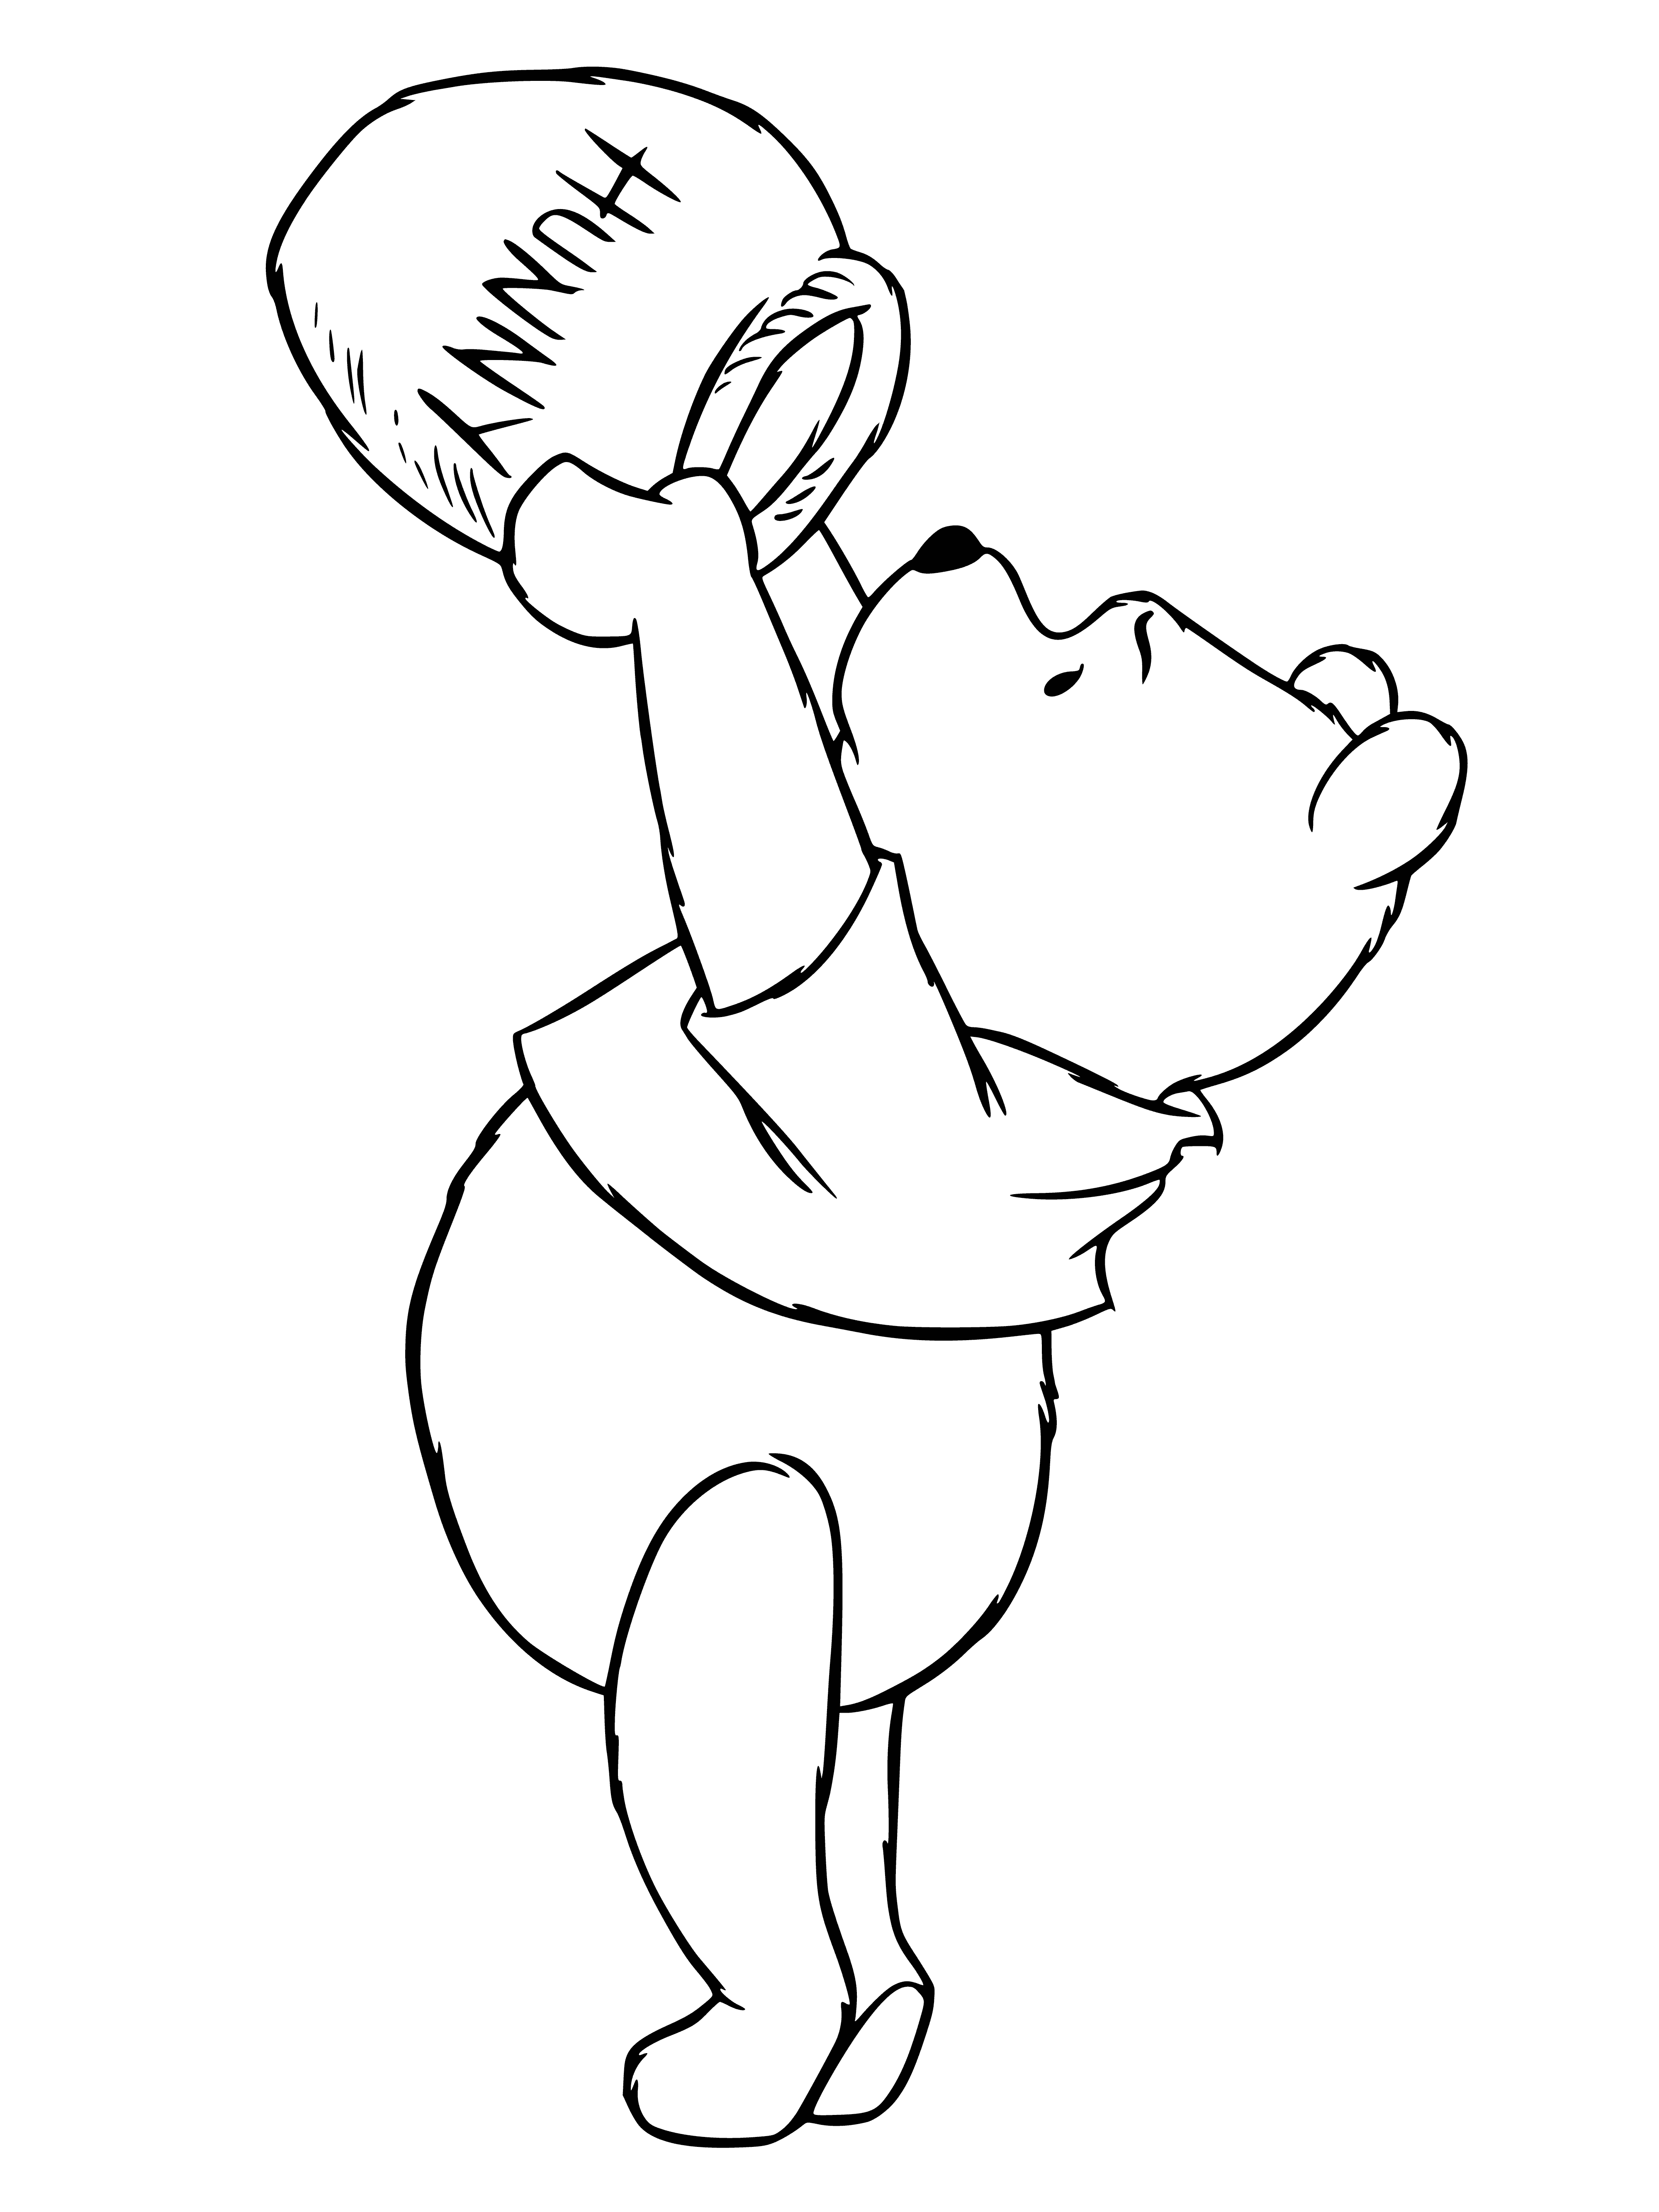 coloring page: Winnie the Pooh sadly looks at a honey pot while standing next to a table with a chair, bowl and open book.